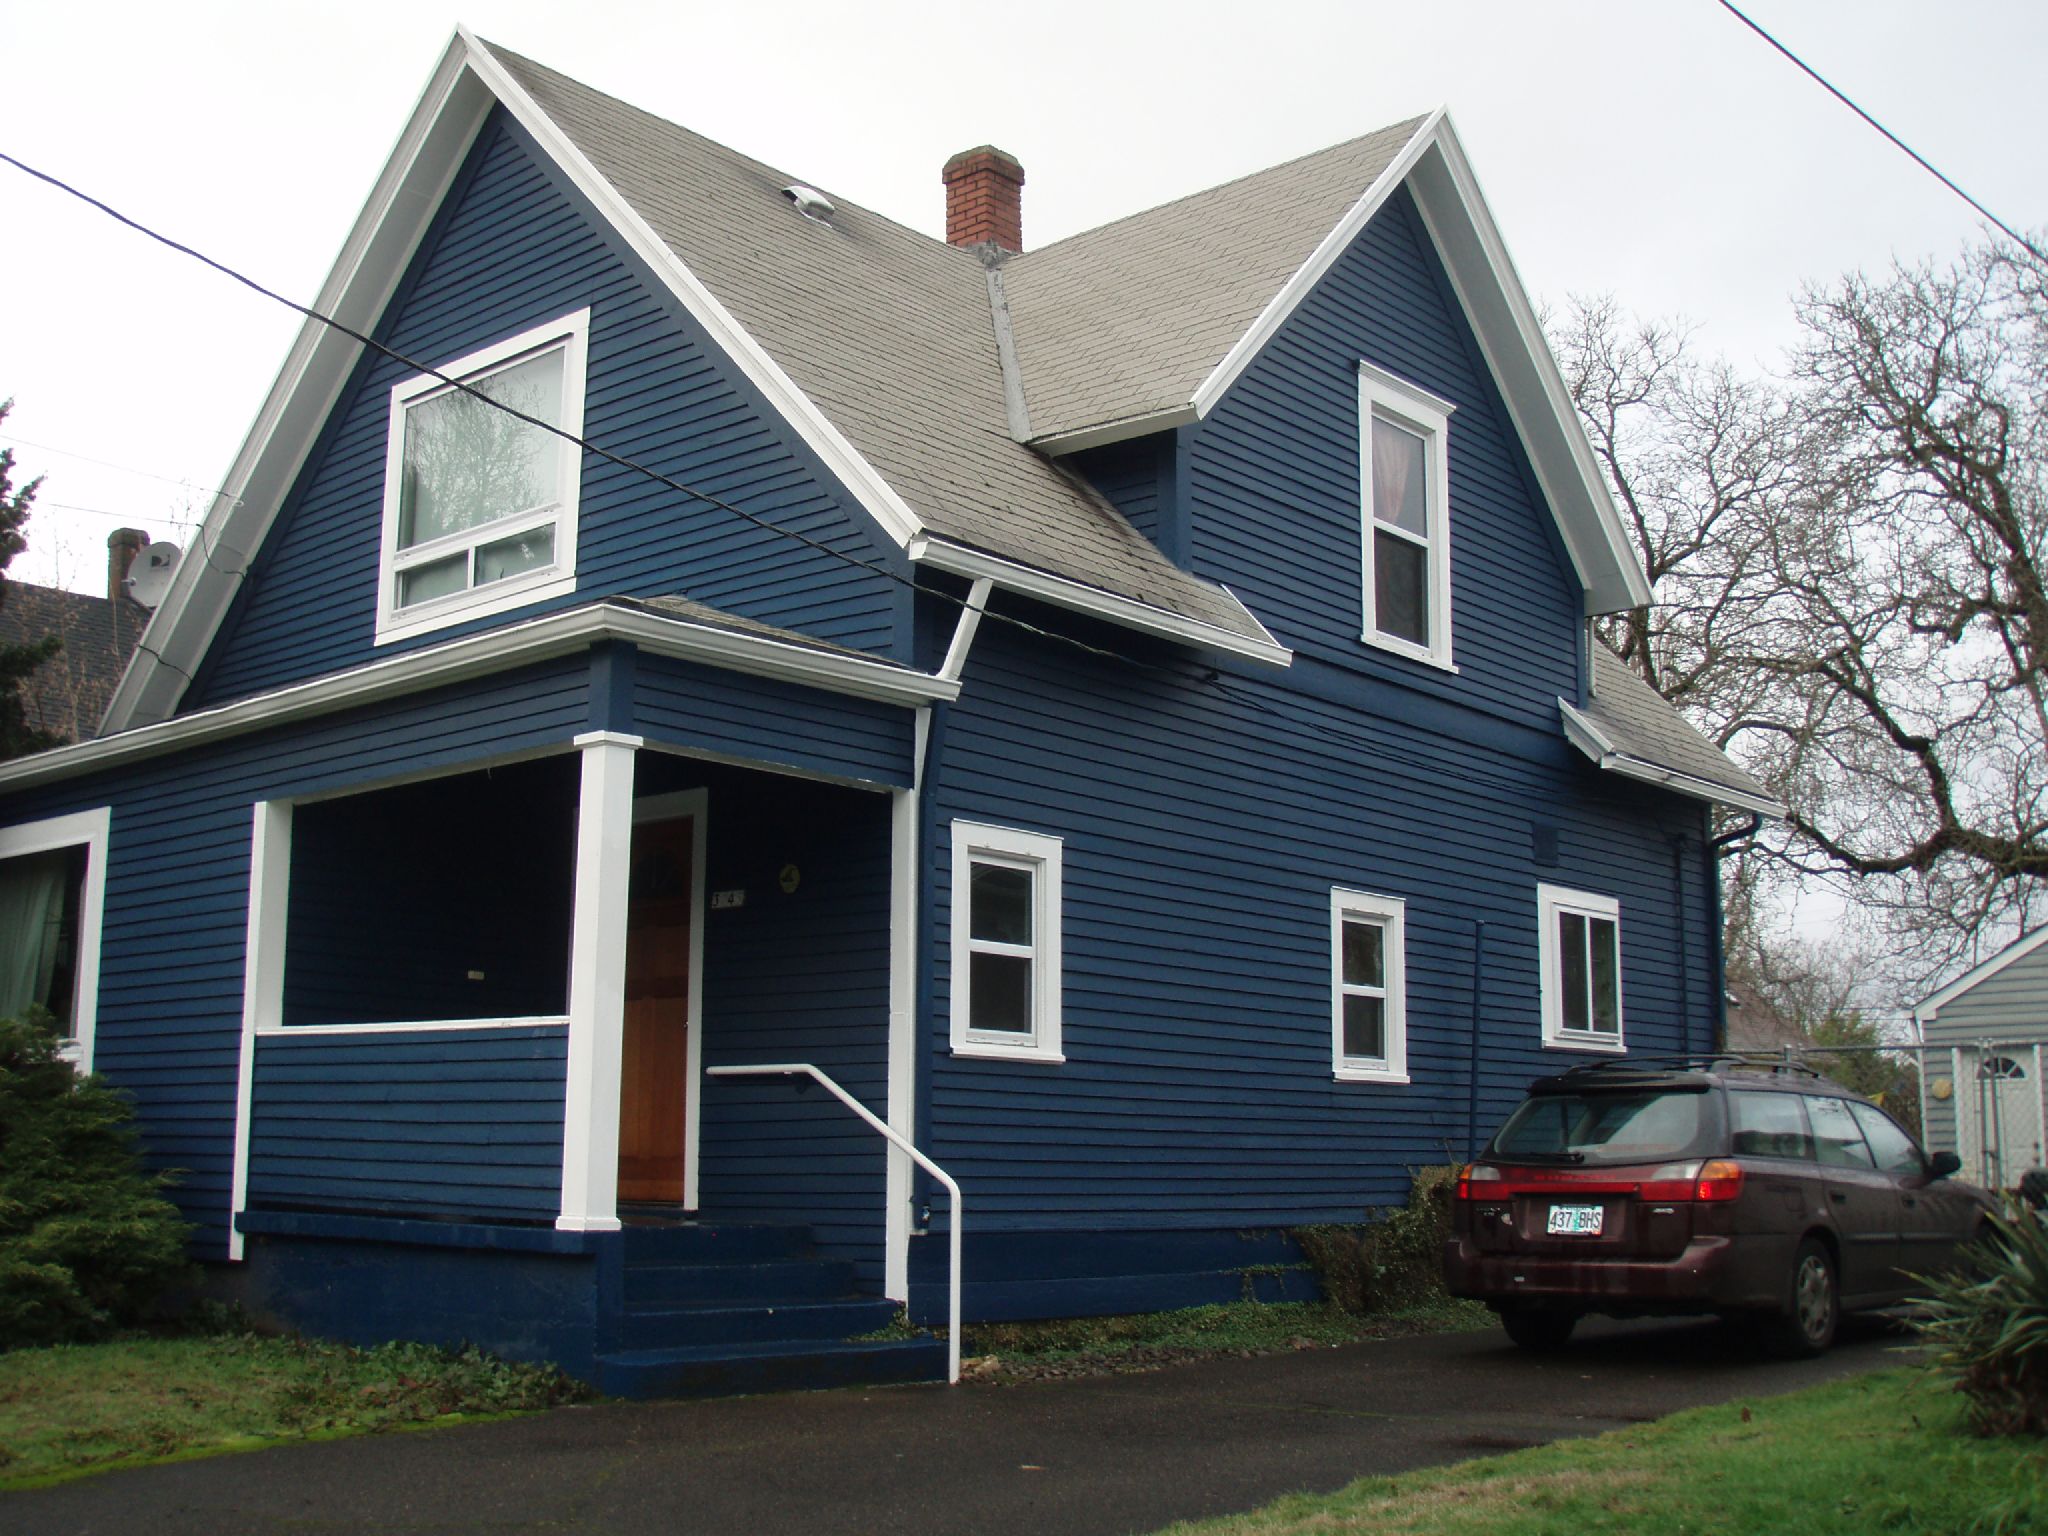 a blue house that is not built on the street